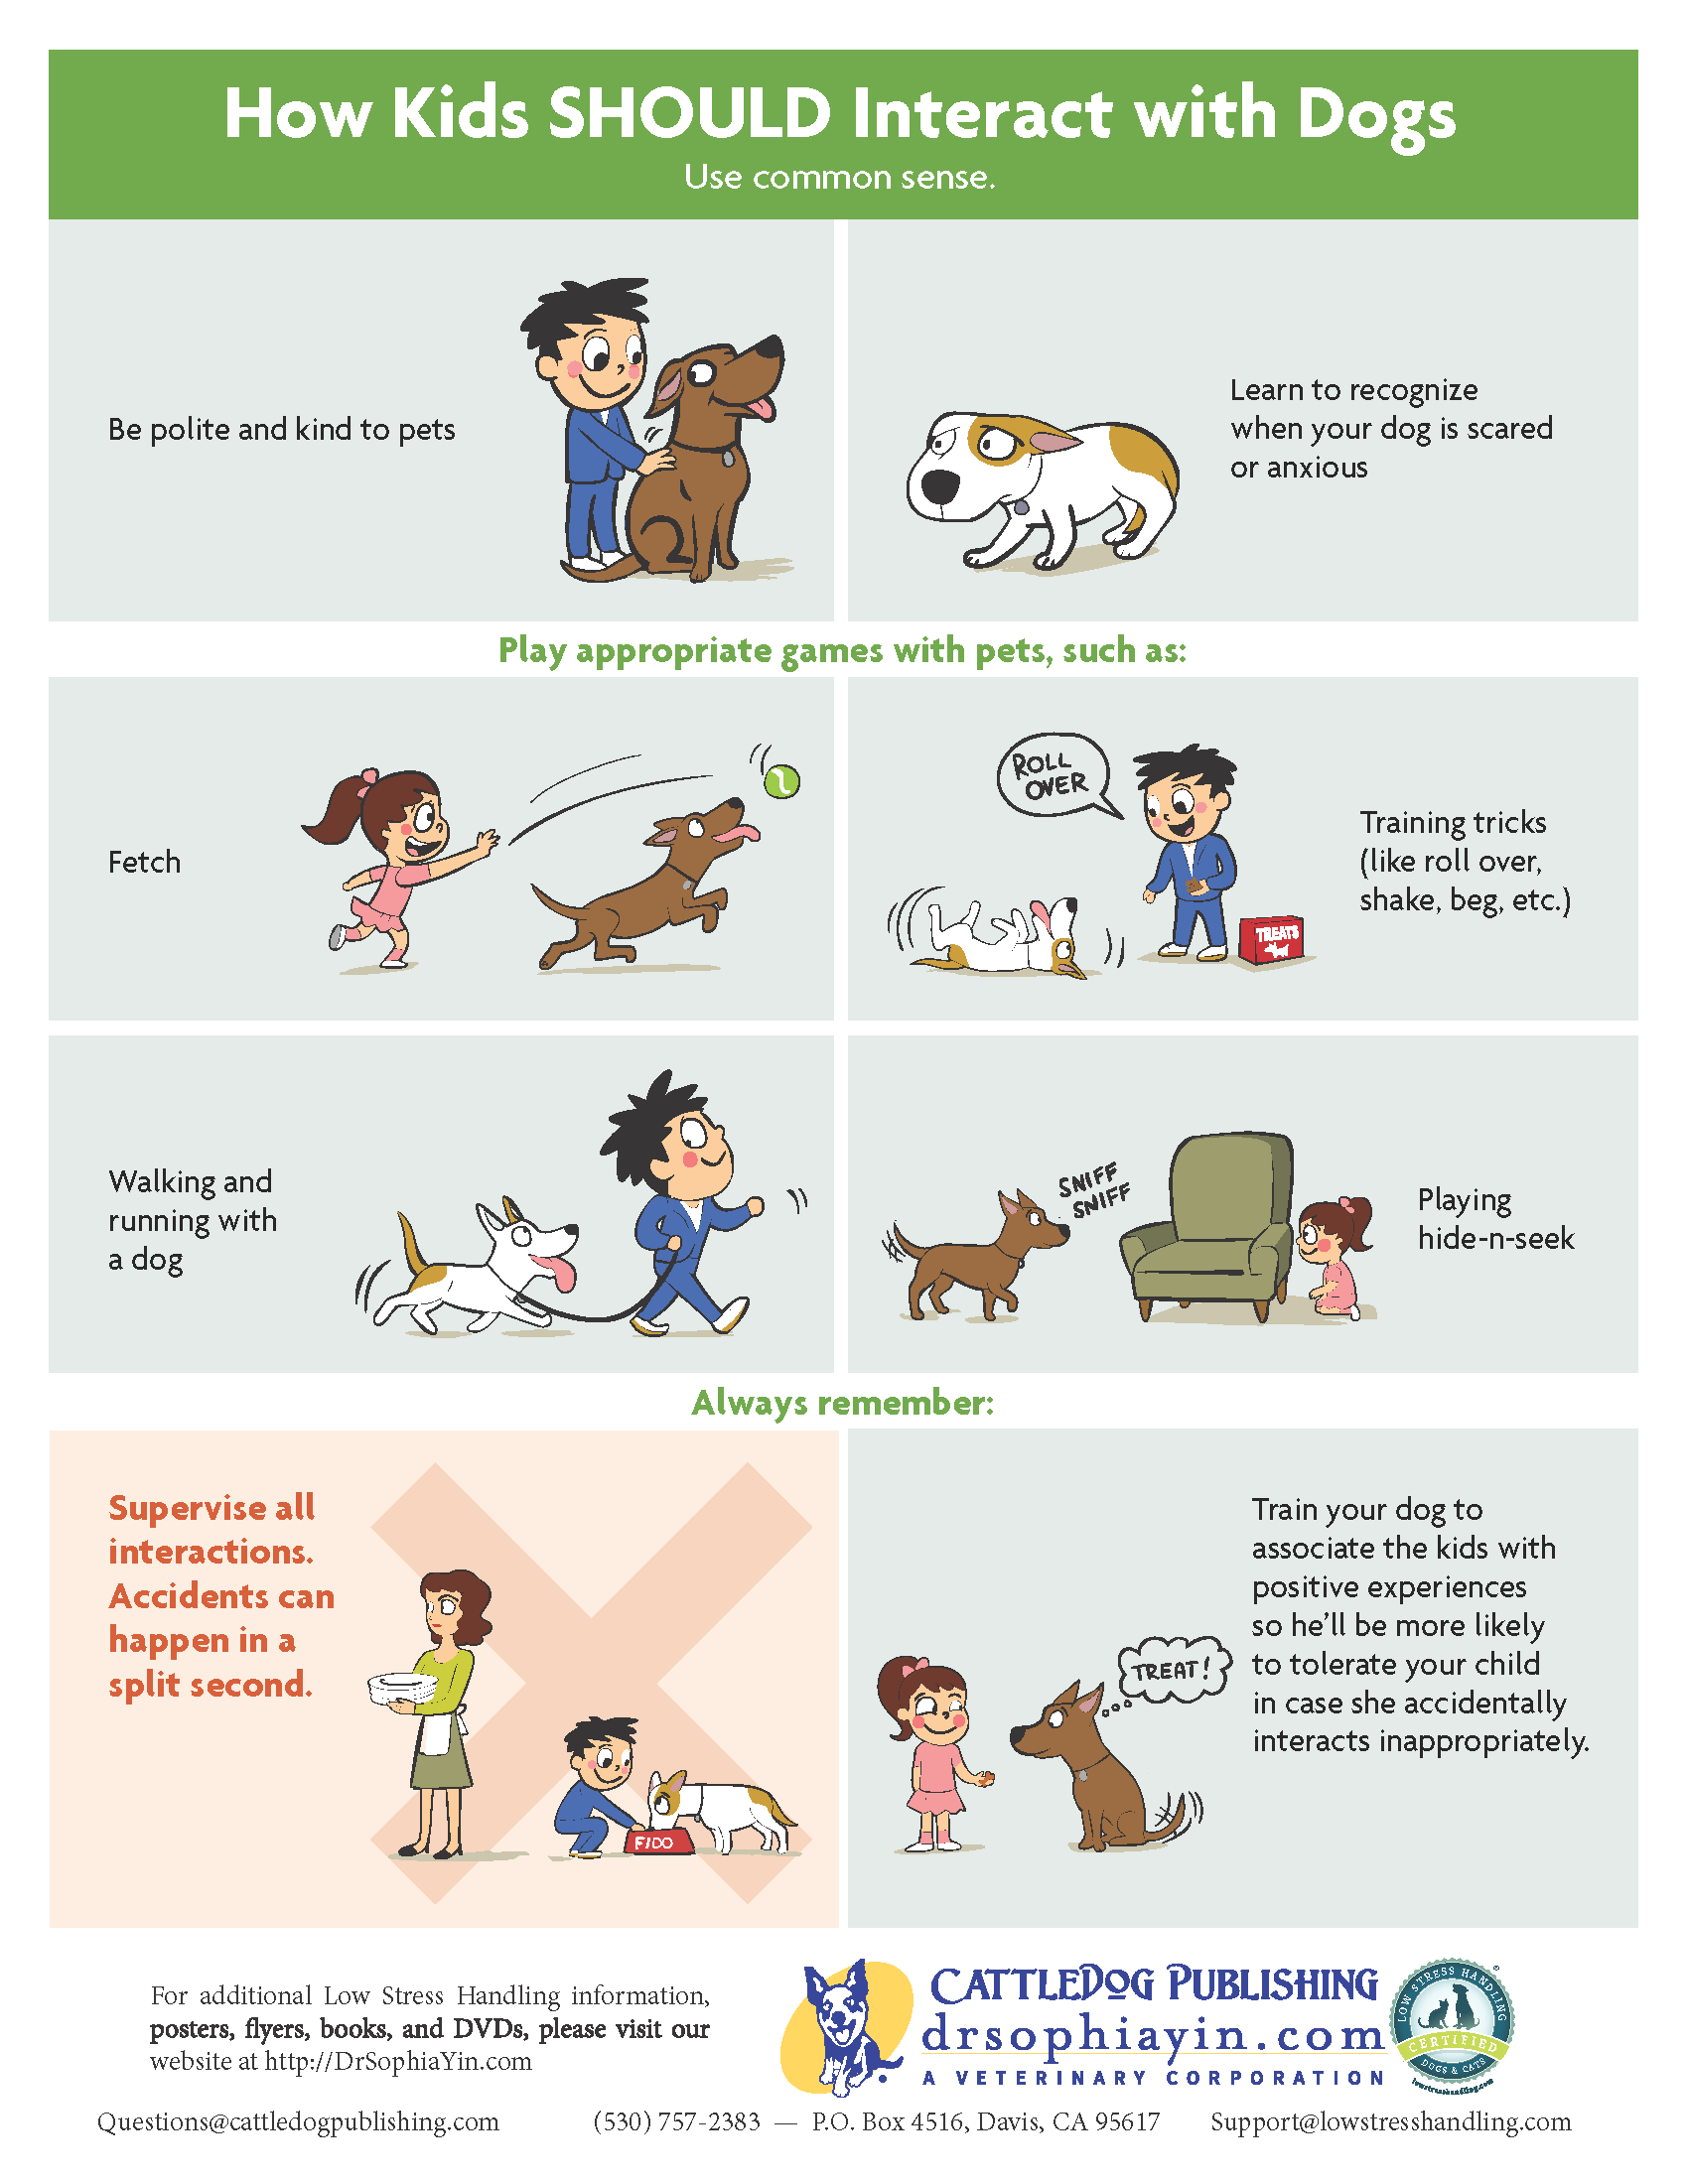 How-Kids-Should-Interact-With-Dogs-Poster.png